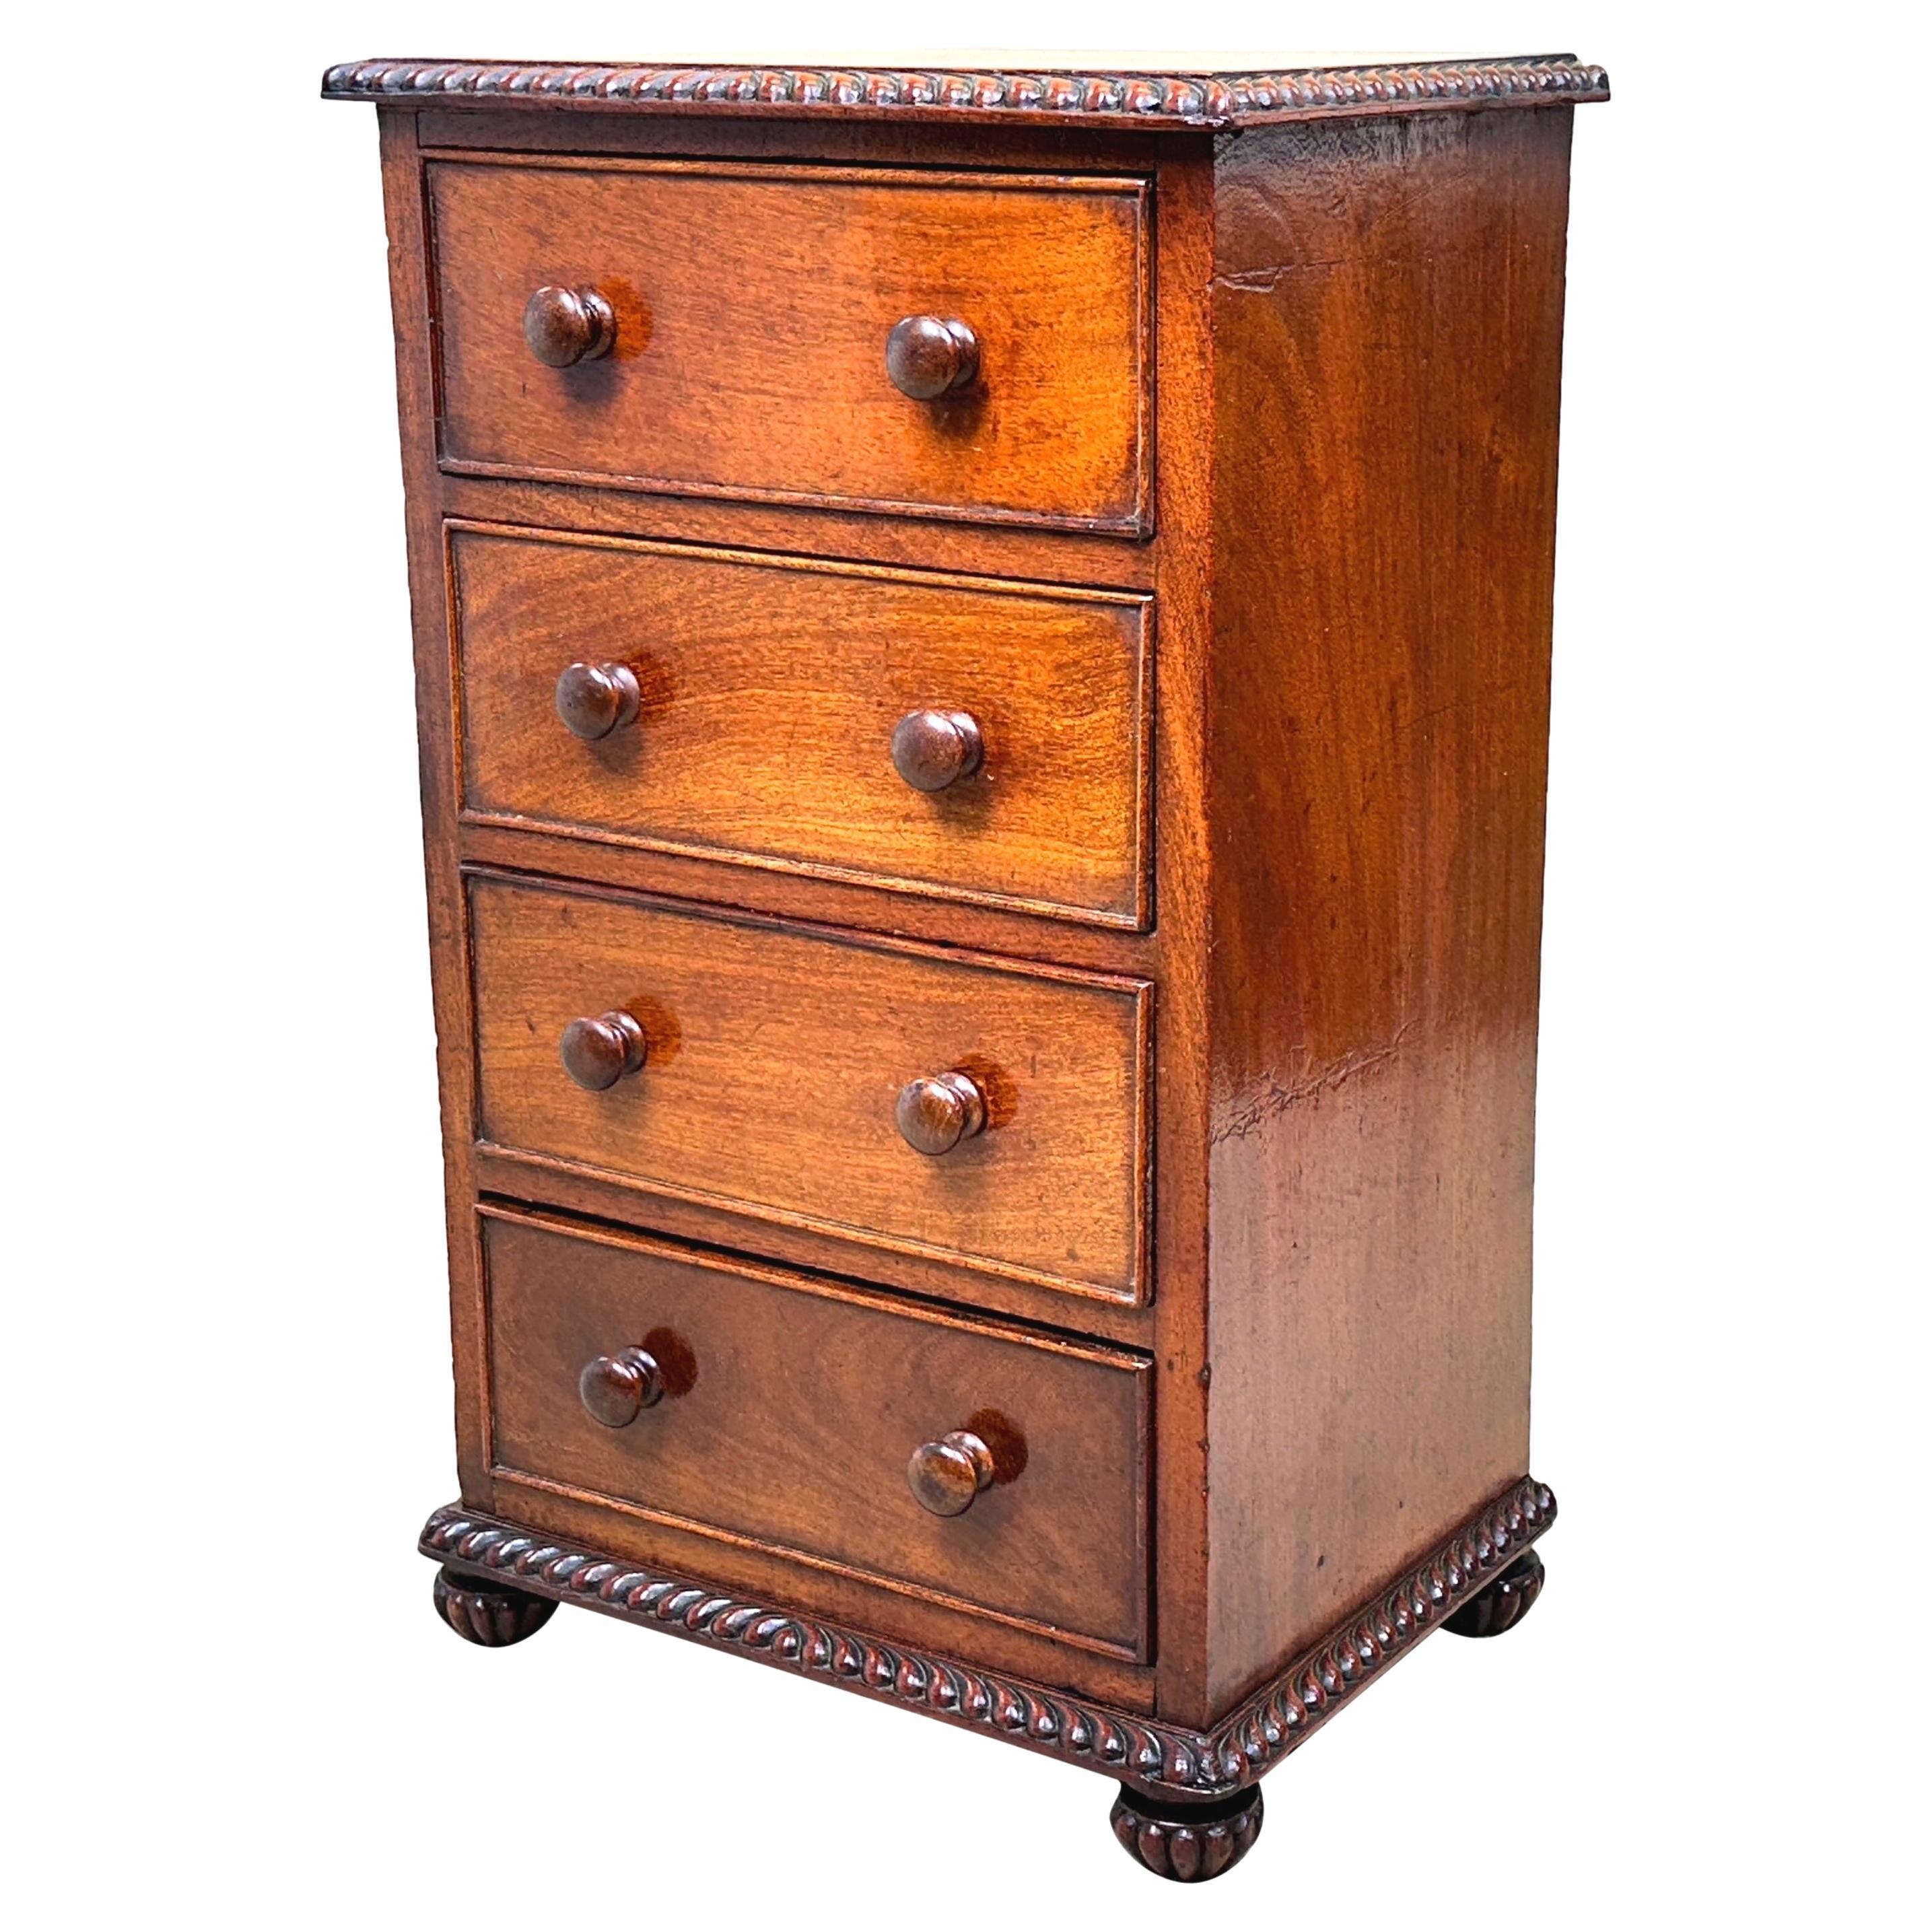 Early 19th Century Anglo-Indian Childs Chest Of Drawers